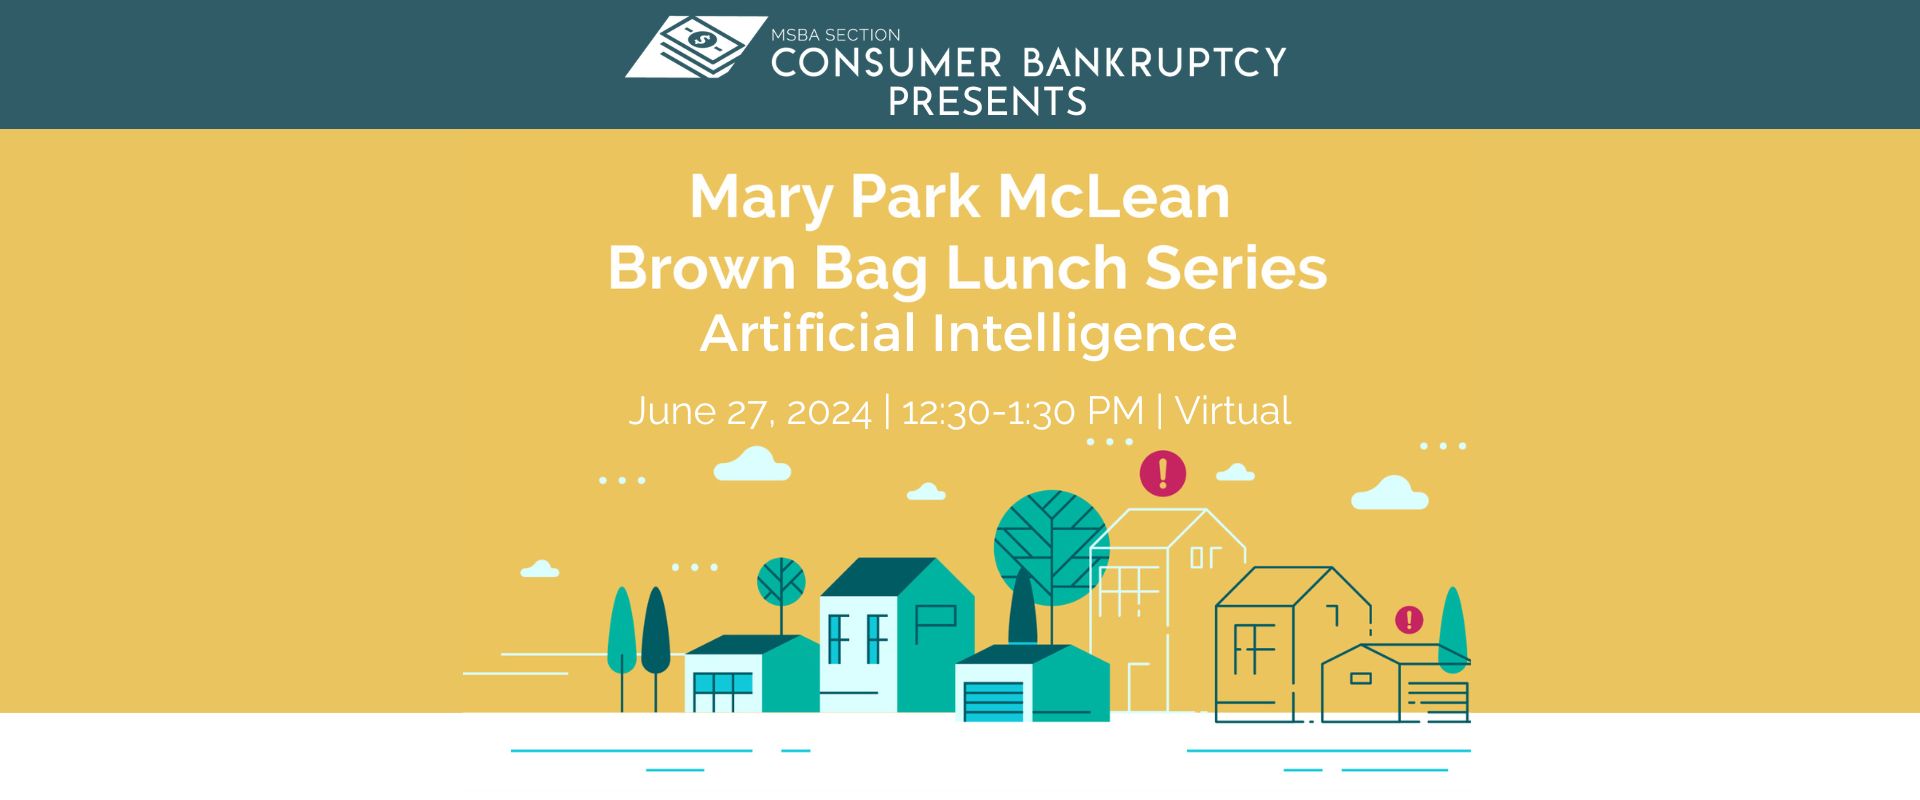 Mary Park McLean Brown Bag Lunch